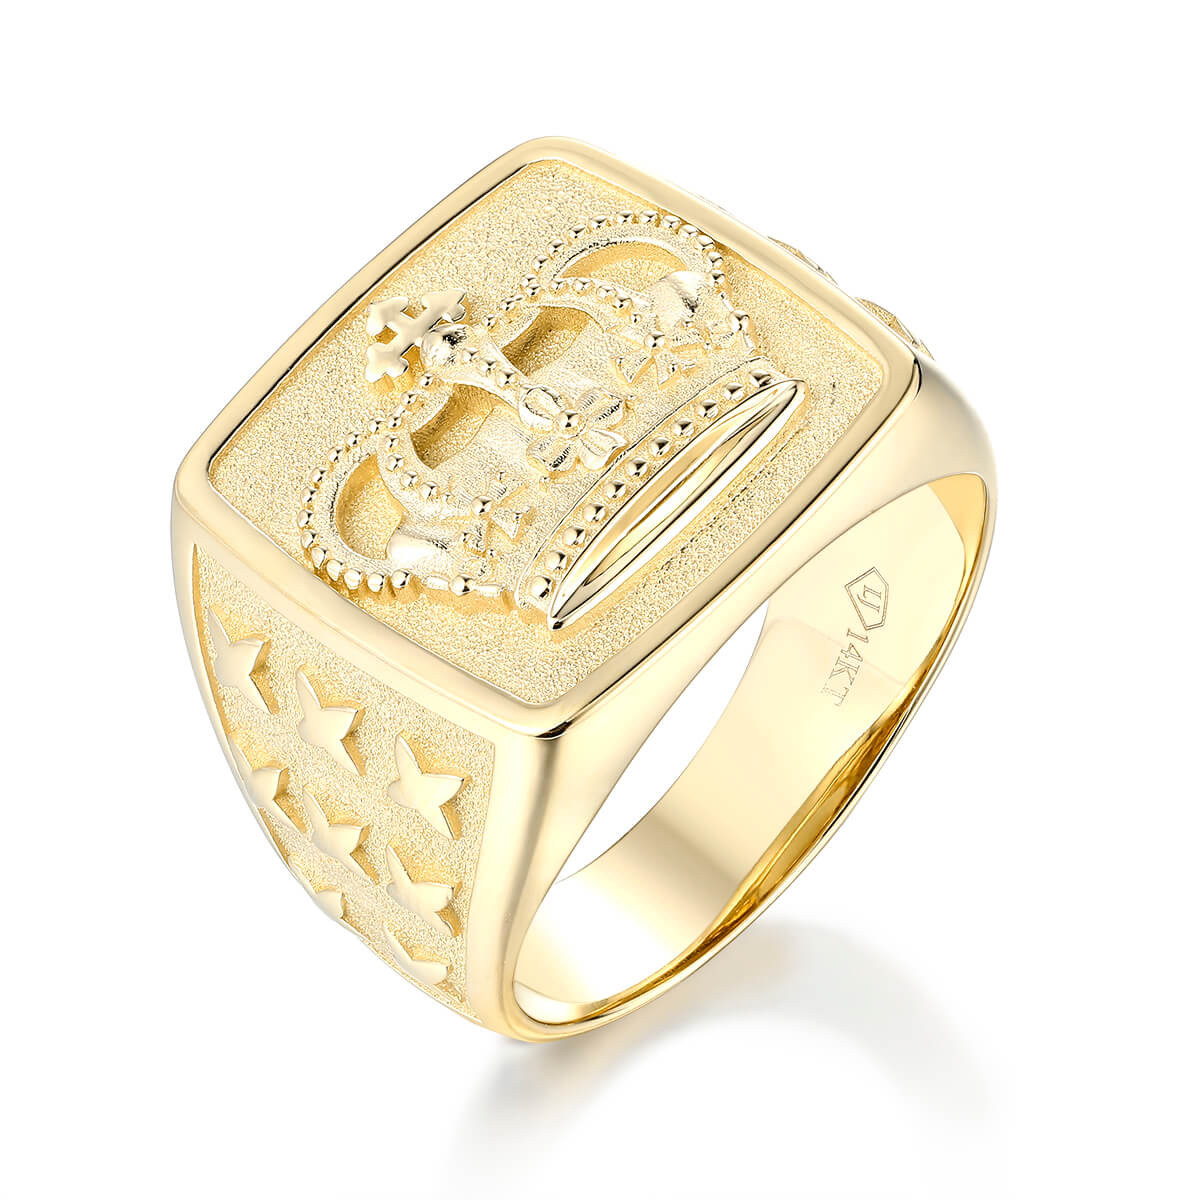 The Royale: Intricate 14 K Gold Crown Ring set with Cubic Zirconia